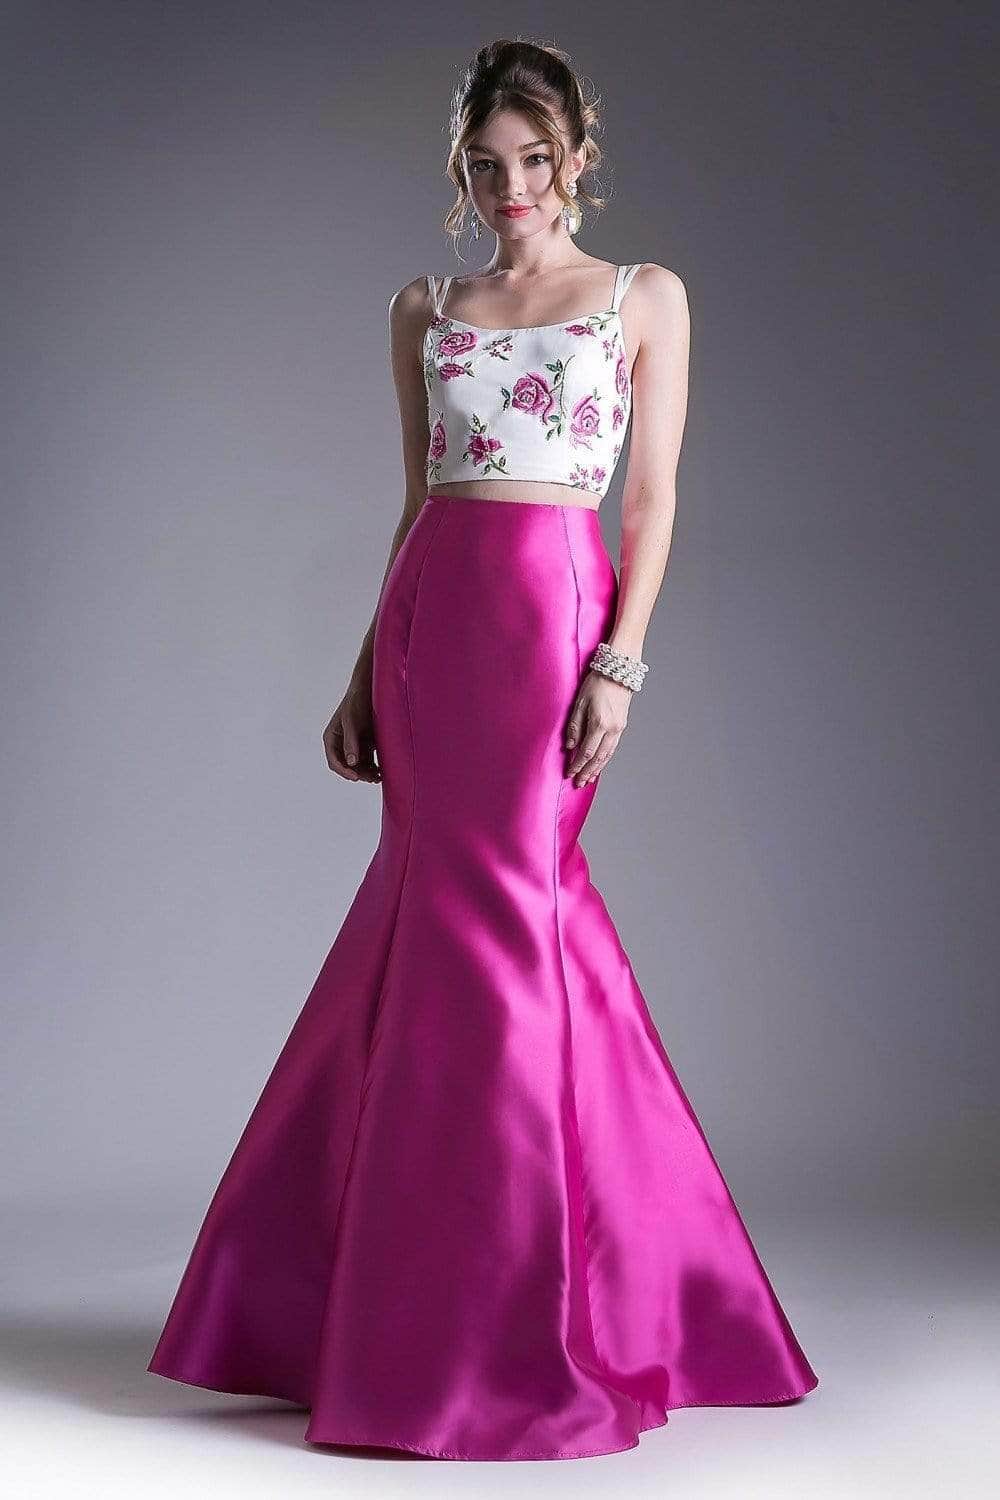 Image of Ladivine KC1737 - Floral Two Piece Mermaid Gown